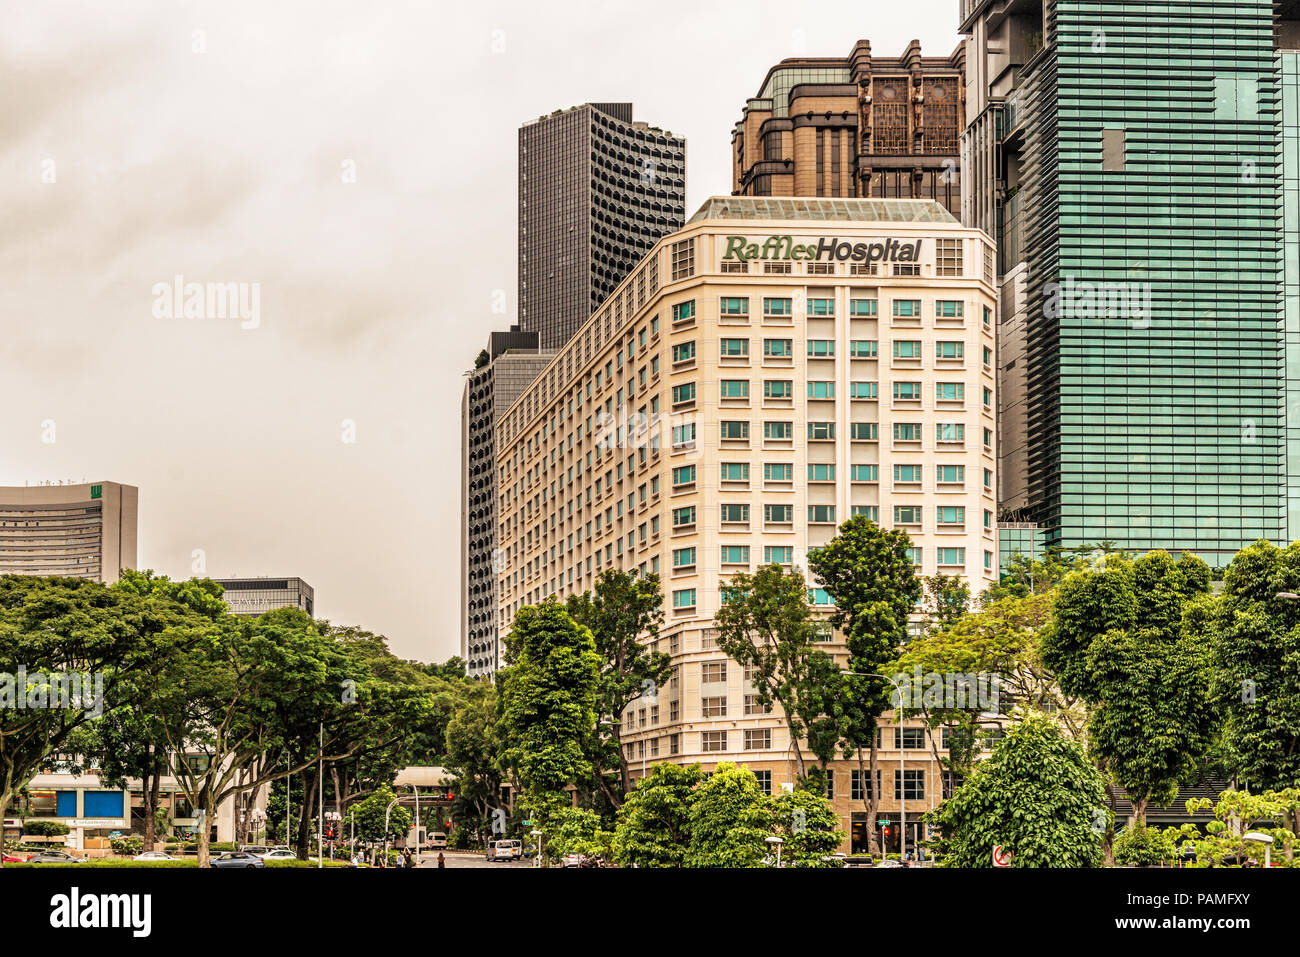 Singapore - January 10, 2018: Facade of the Raffles Hospital complex buildings as seen from Orchid Road in the city of Singapore. Stock Photo